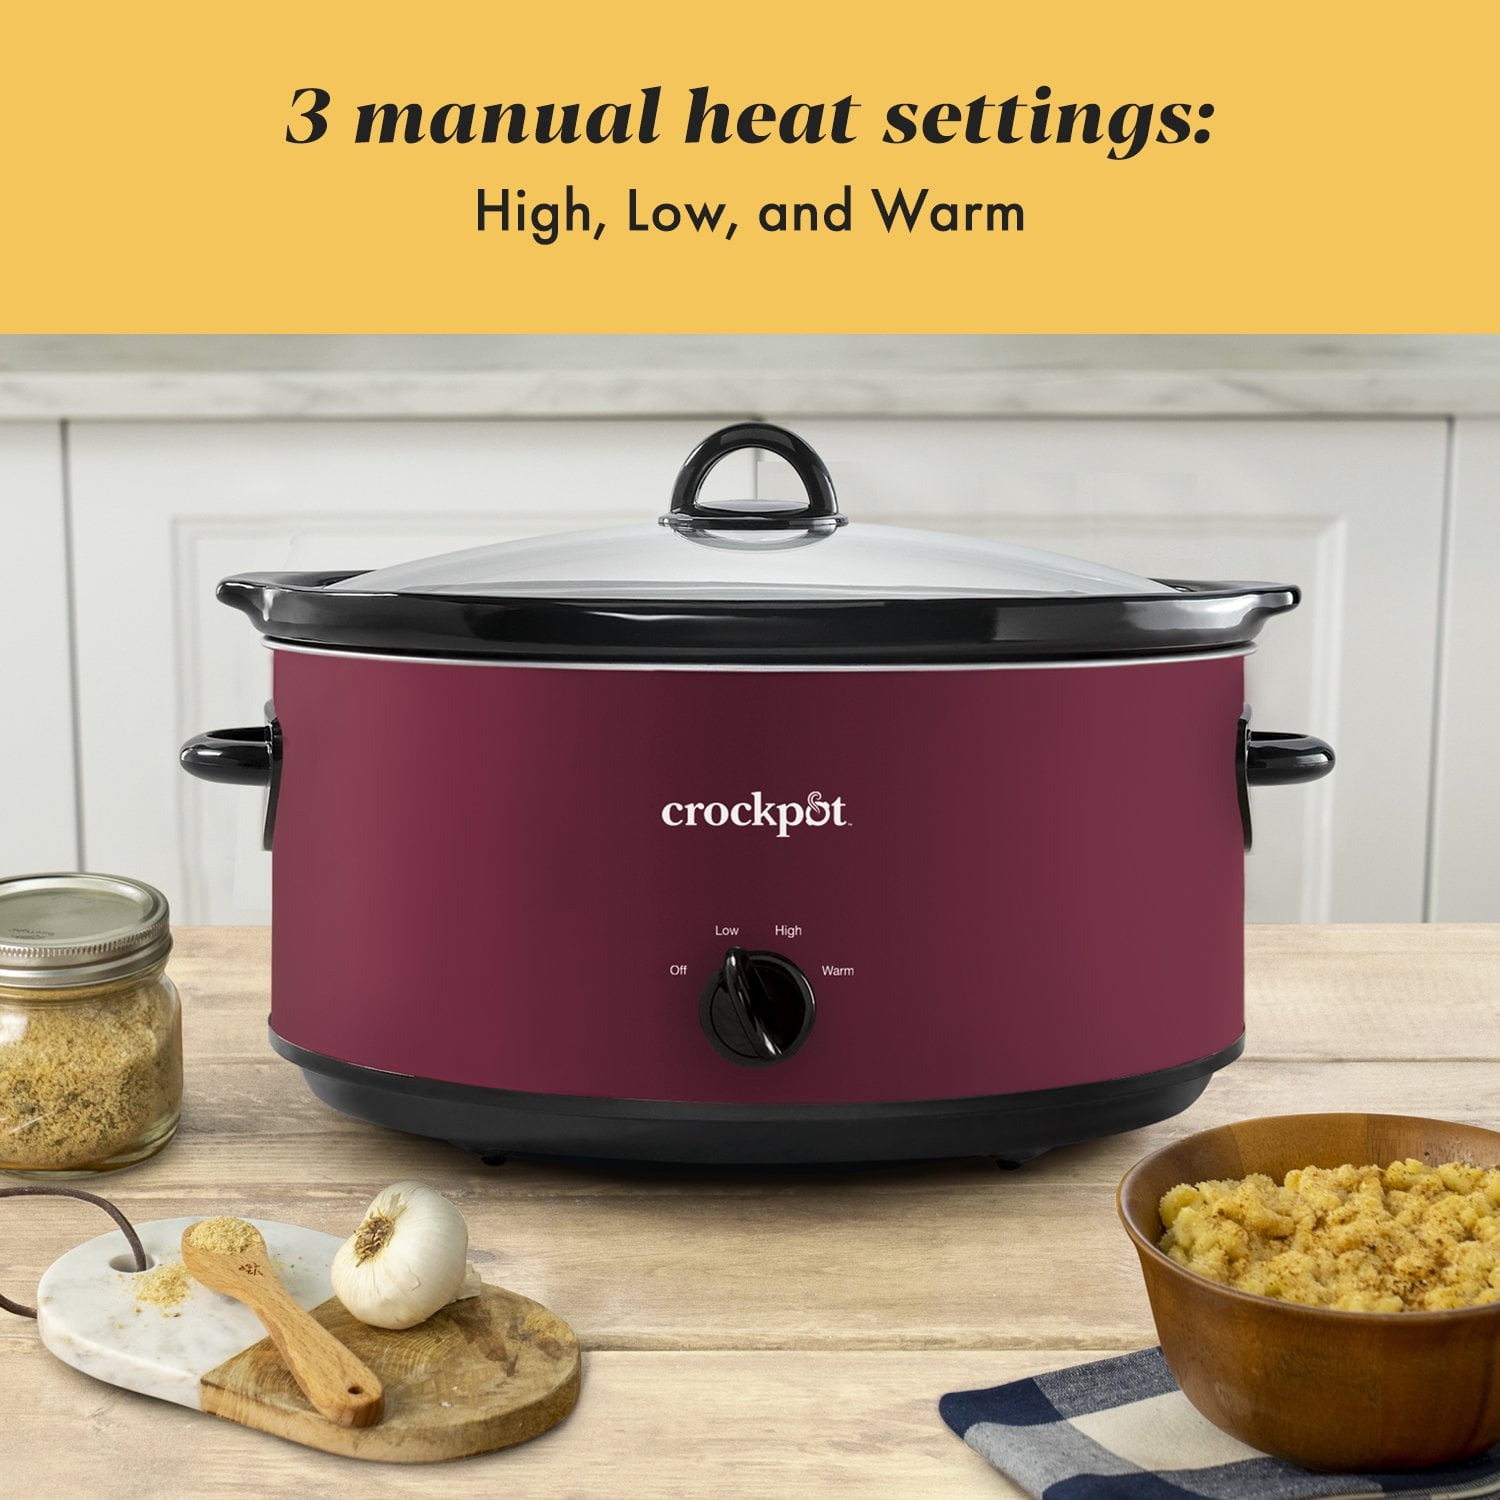 Crockpot 8 Qt Extra-Large Manual Slow Cooker Rhubarb for Family Meals  Potlucks